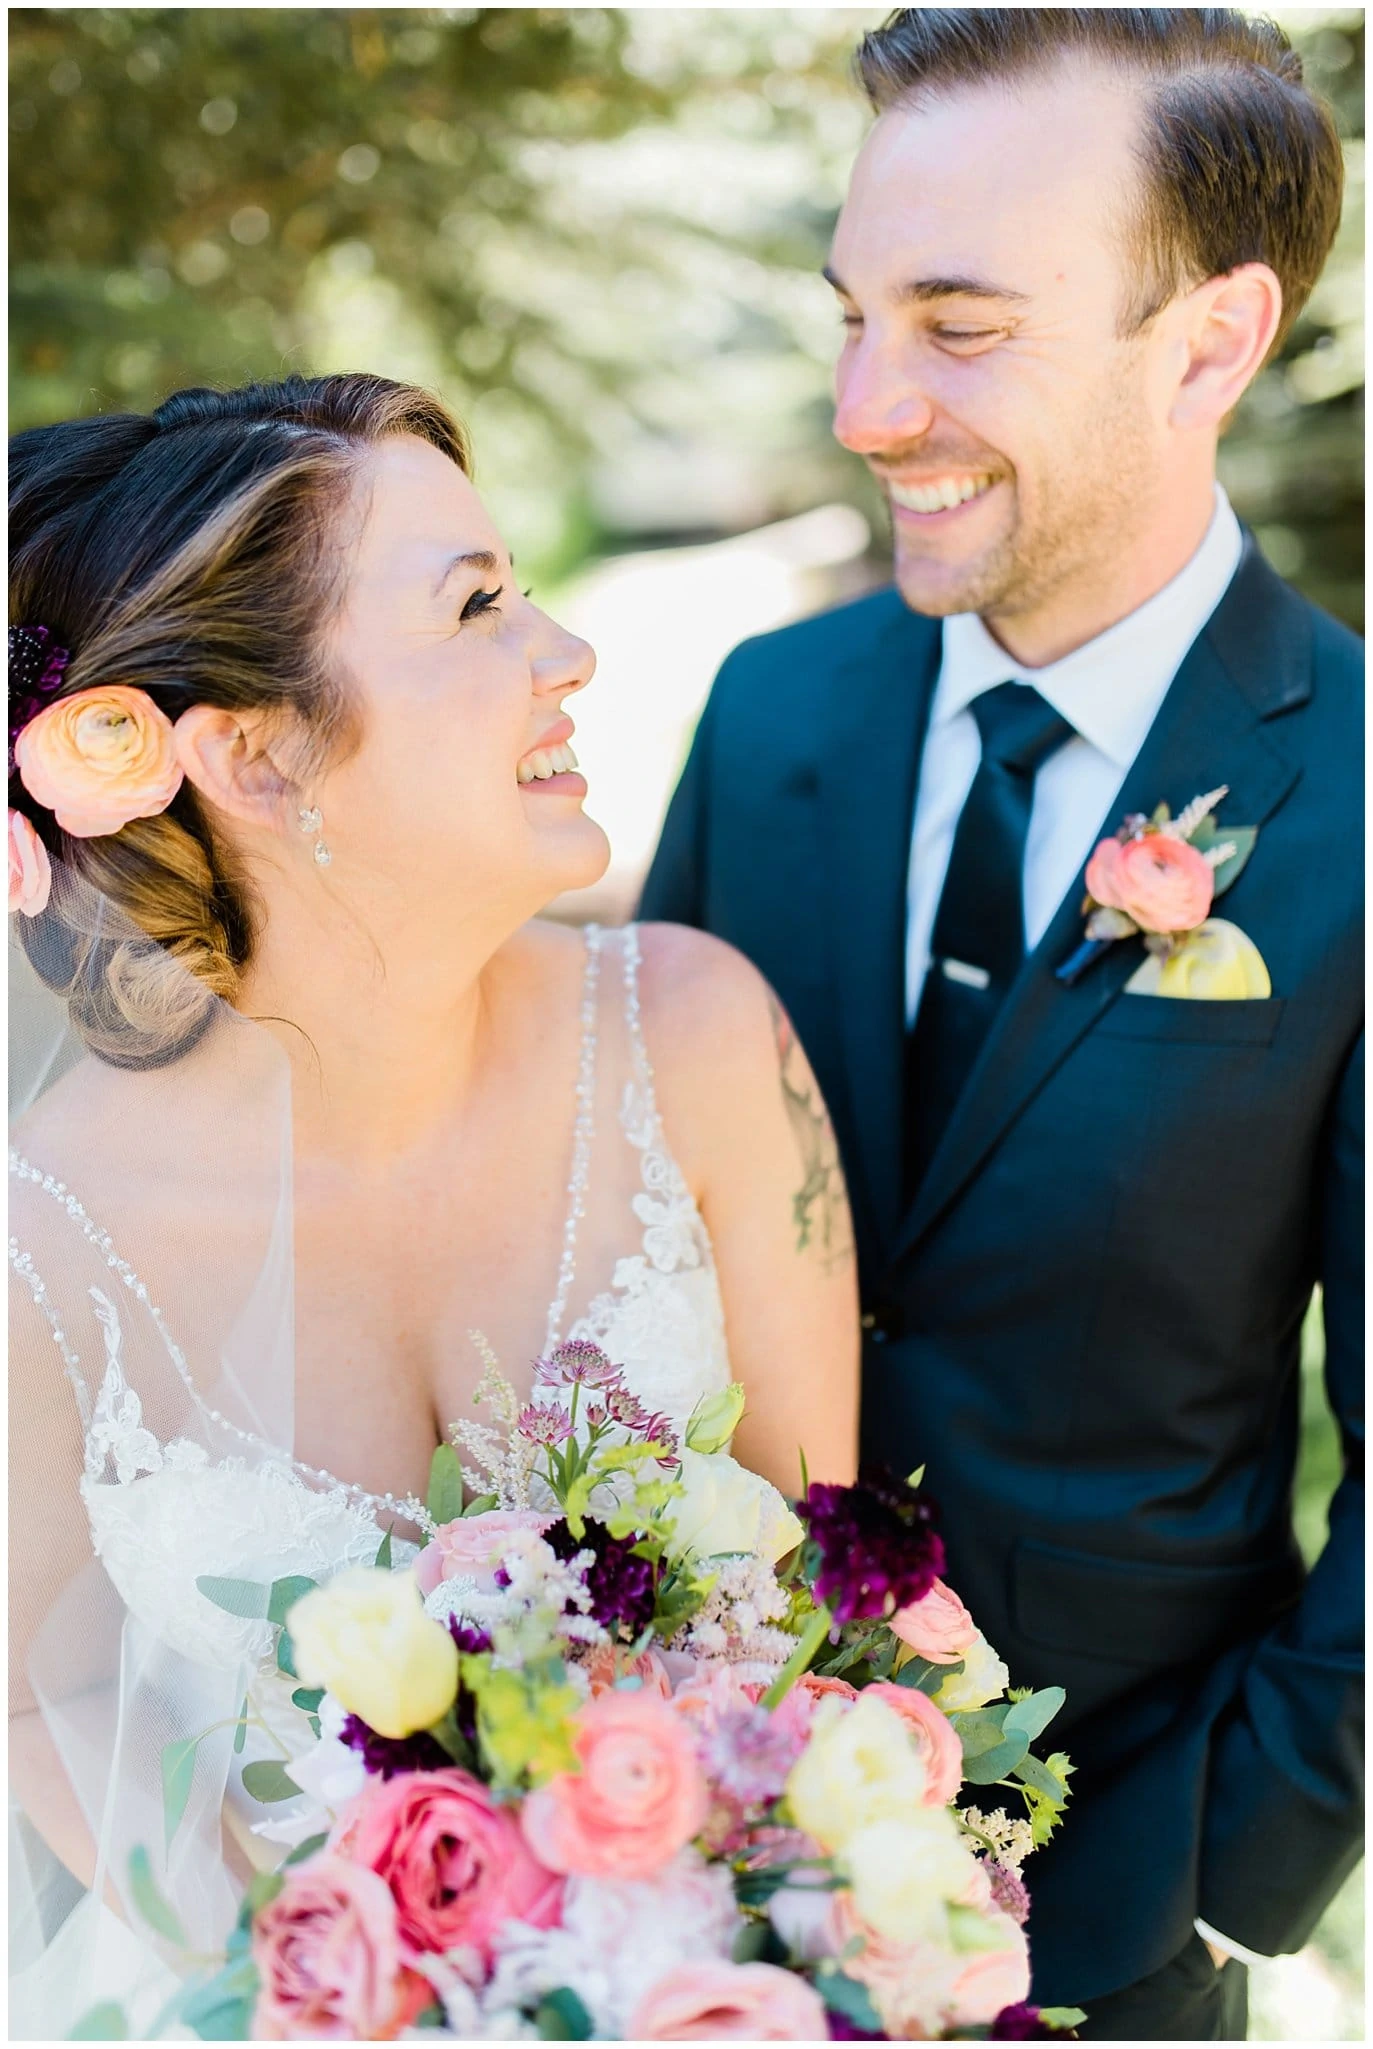 Peach and spring wedding colors at Sonnenalp Hotel Vail Colorado Wedding by Vail Wedding Photographer Jennie Crate